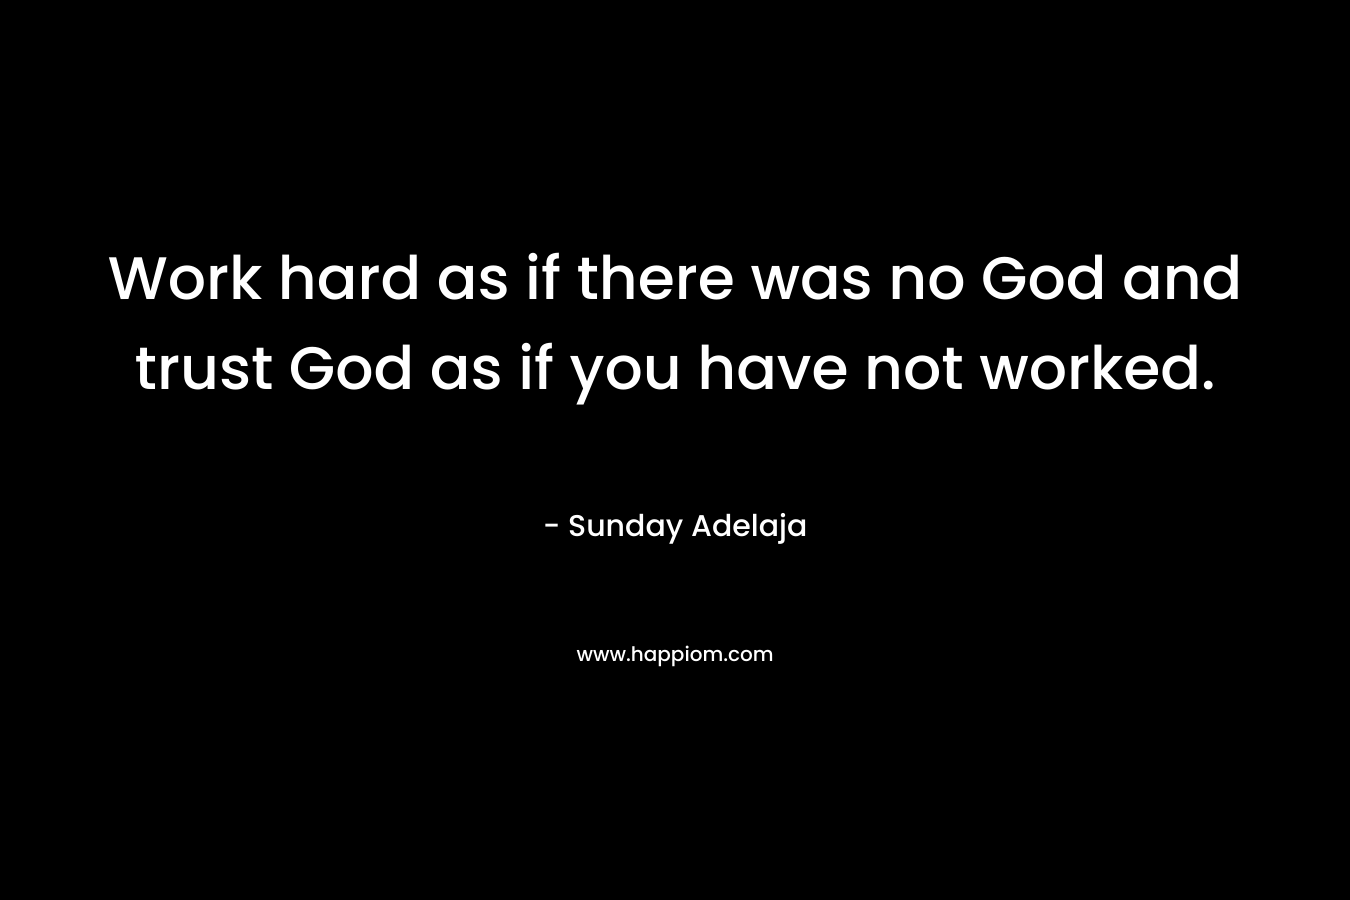 Work hard as if there was no God and trust God as if you have not worked.